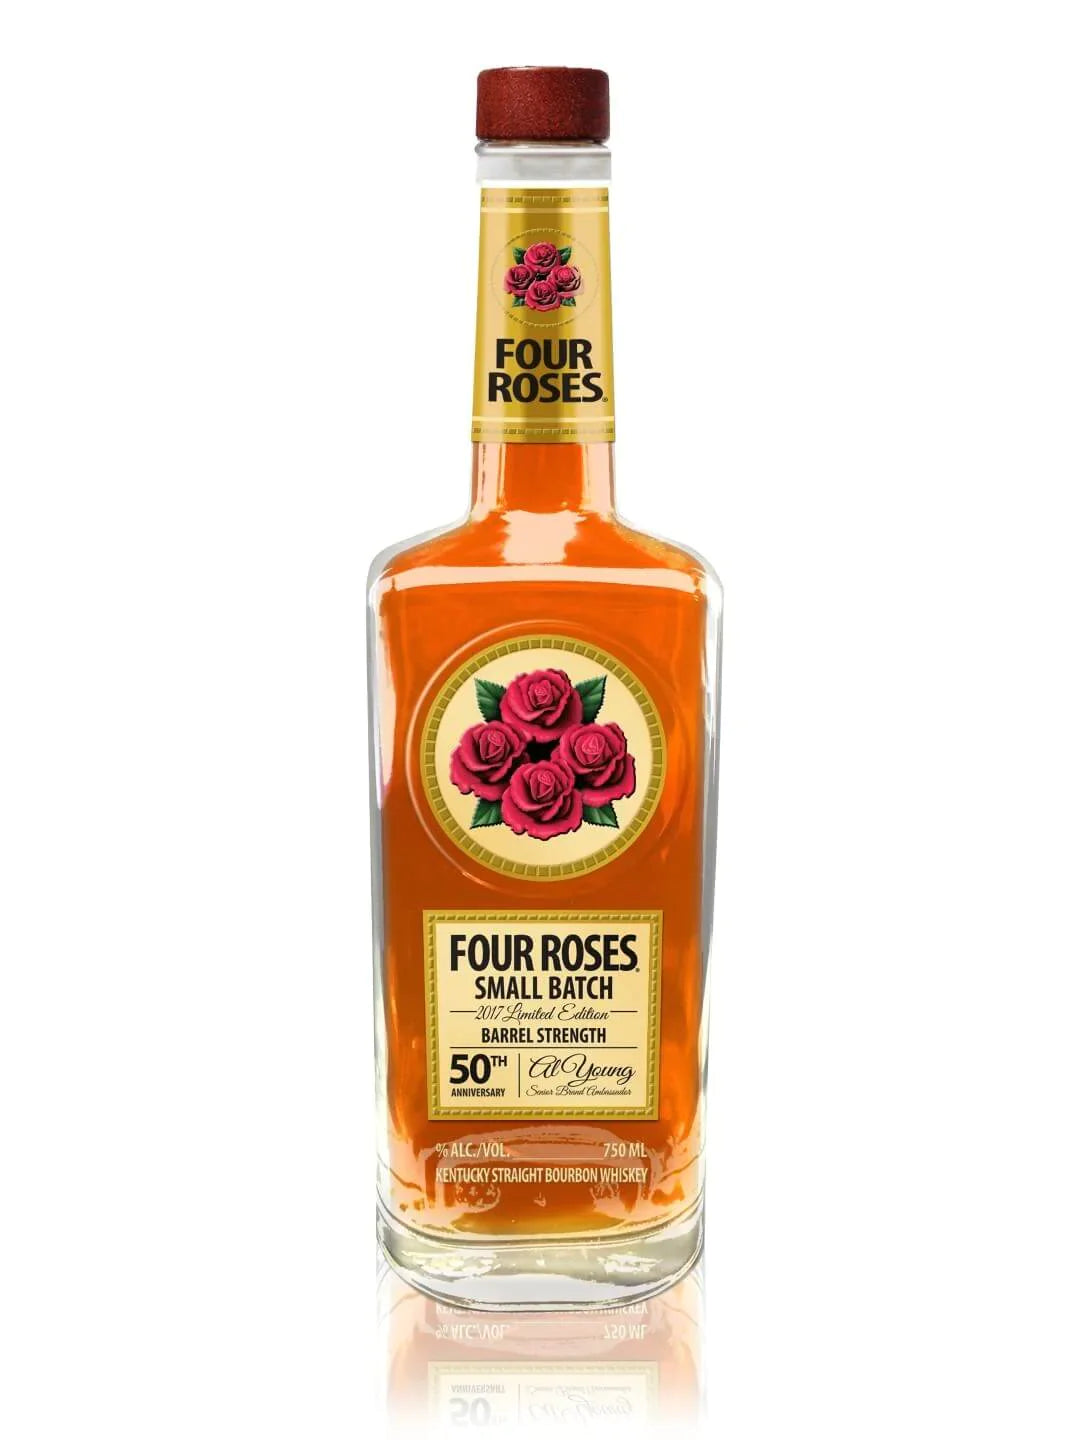 Buy Four Roses Al Young 50th Anniversary Limited Edition Small Batch Online - The Barrel Tap Online Liquor Delivered